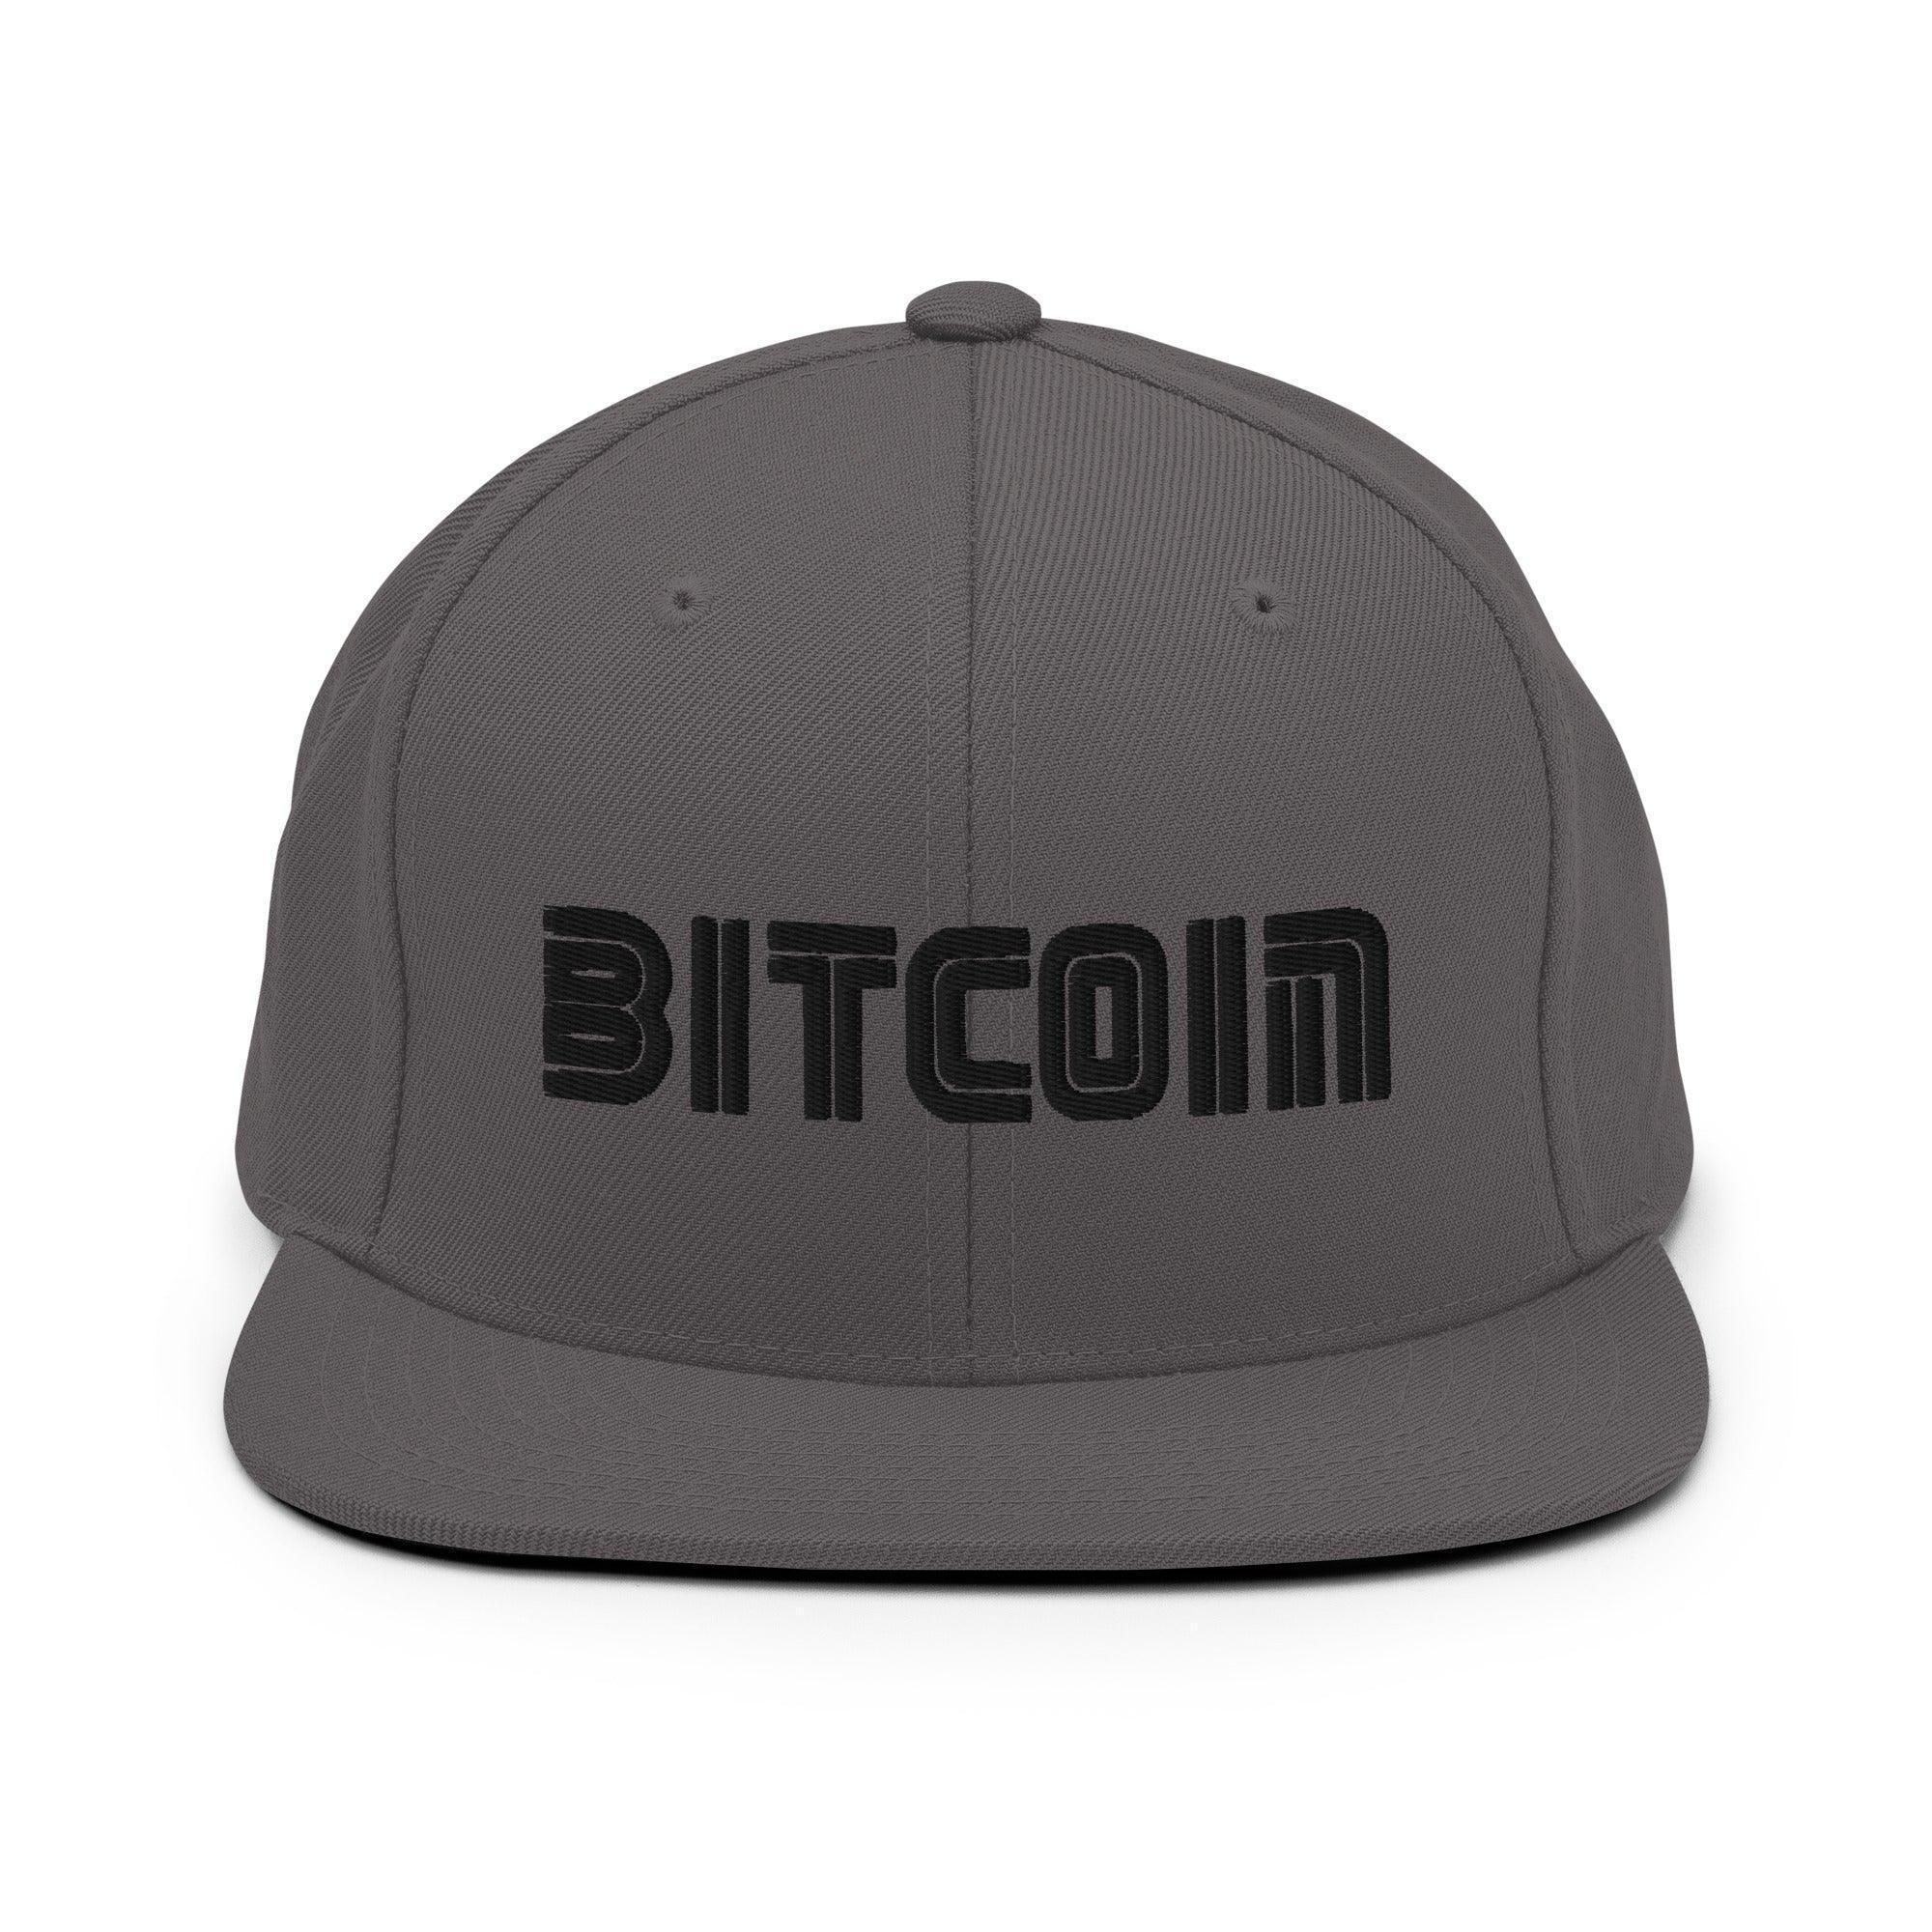 Bitcoin Cyptocurrency Snapback Hat - InvestmenTees